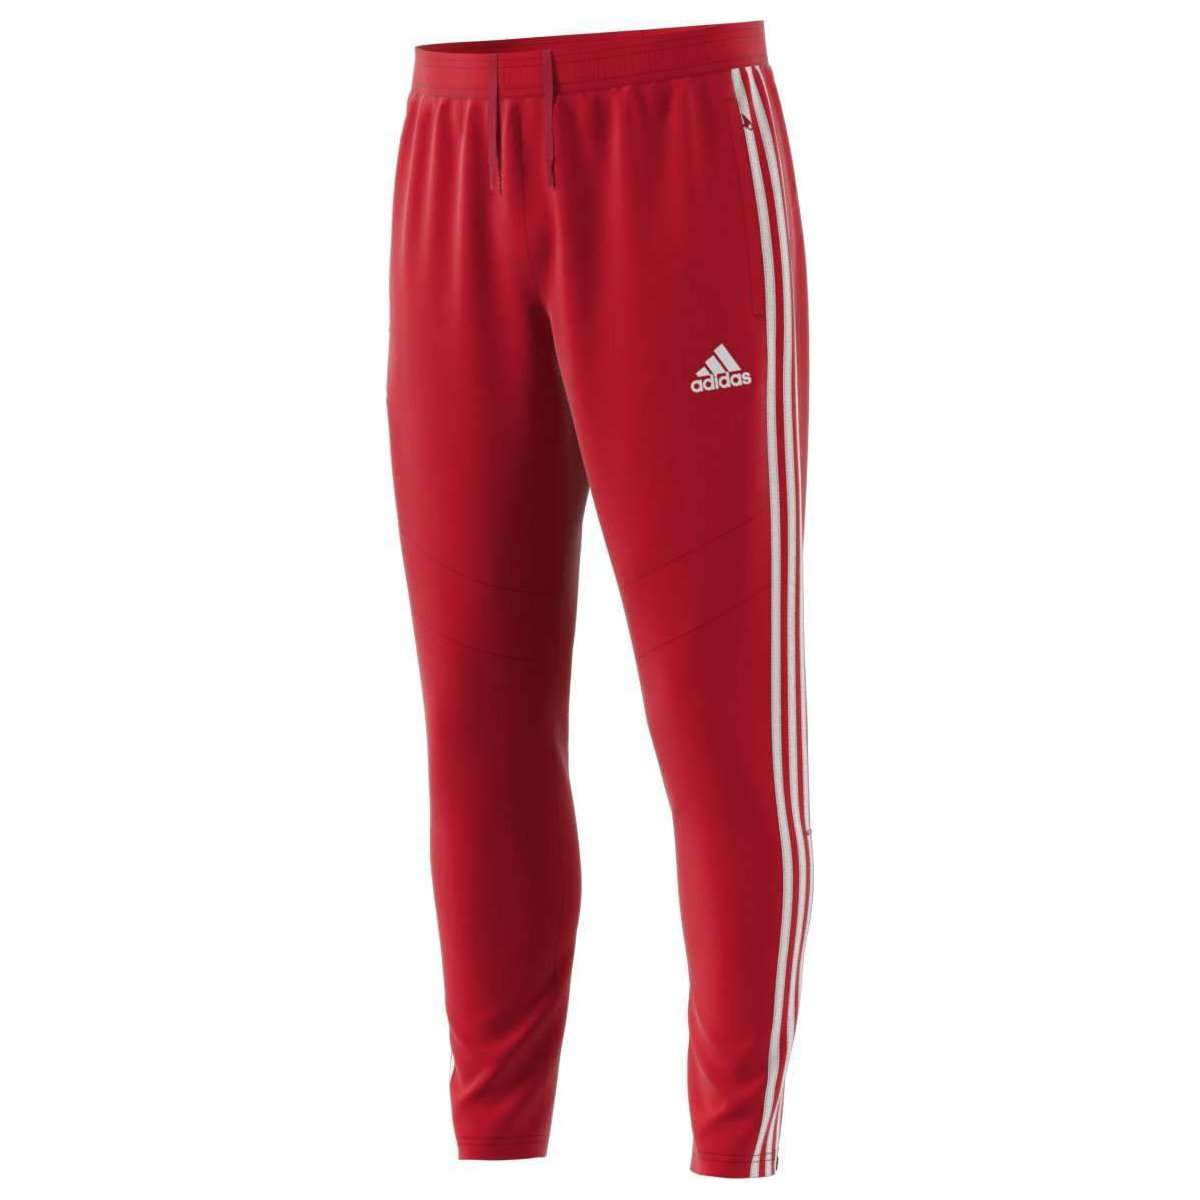 red training pants